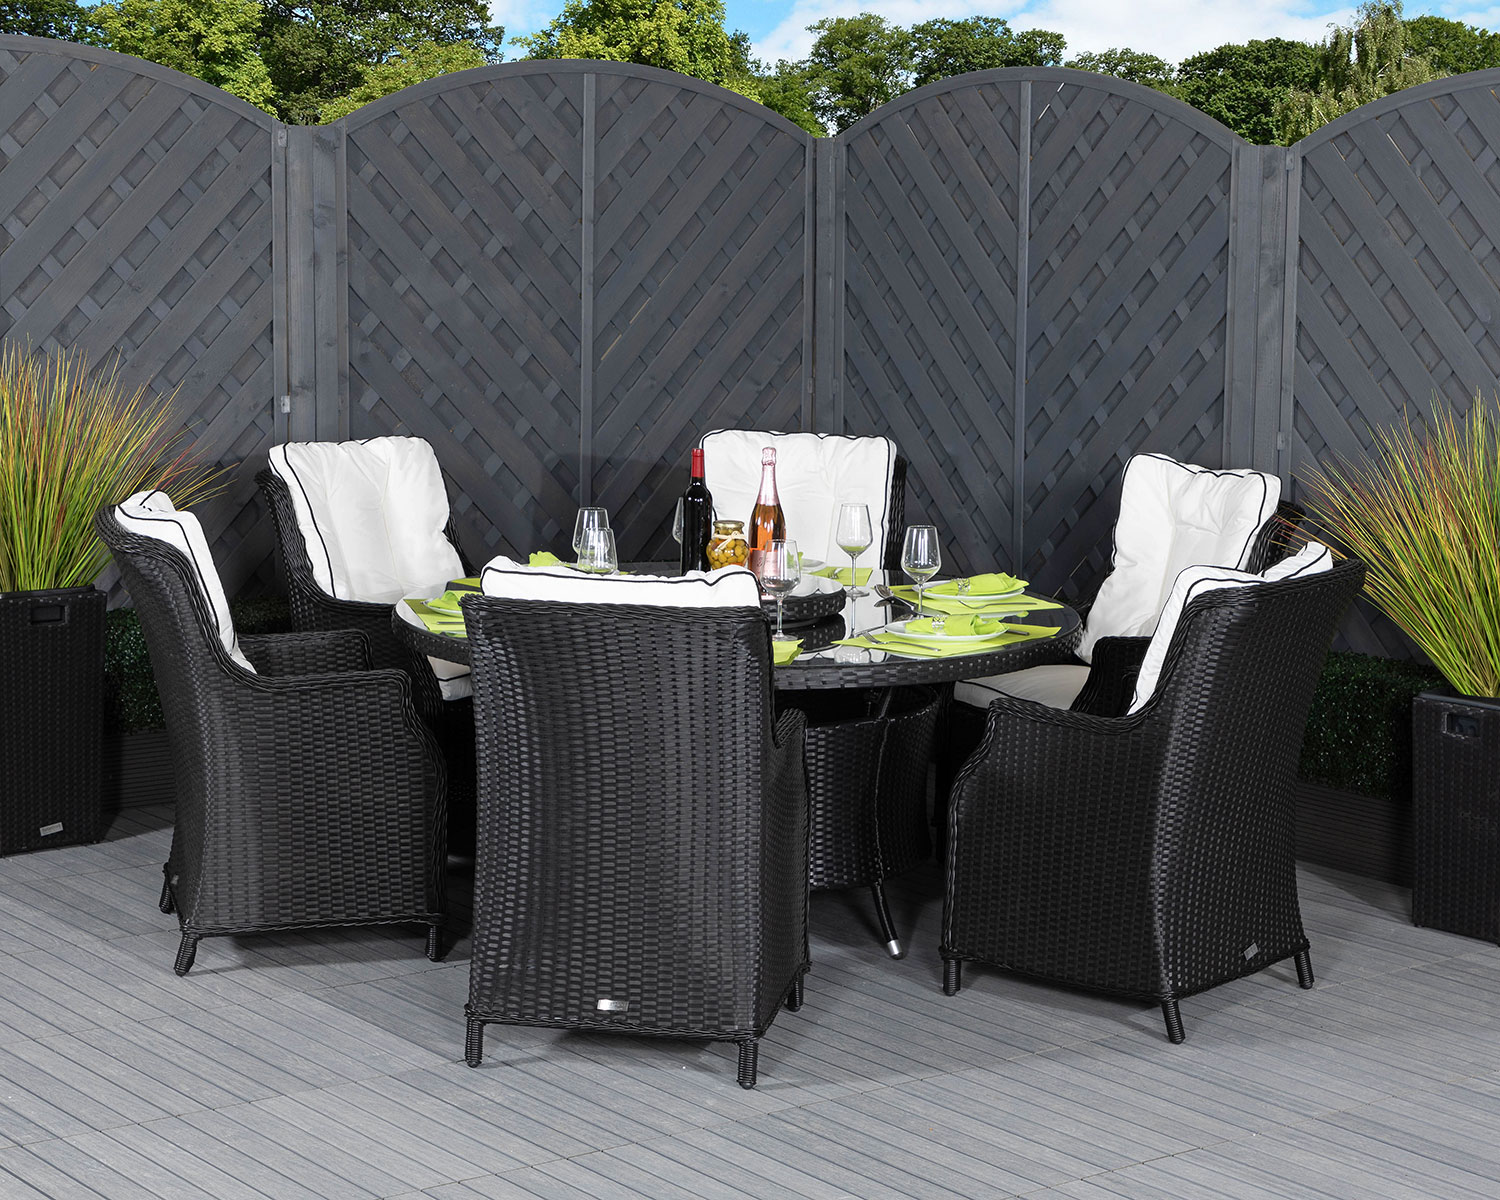 Large Round Rattan Garden Table & 6 Chairs in Black & White - Riviera